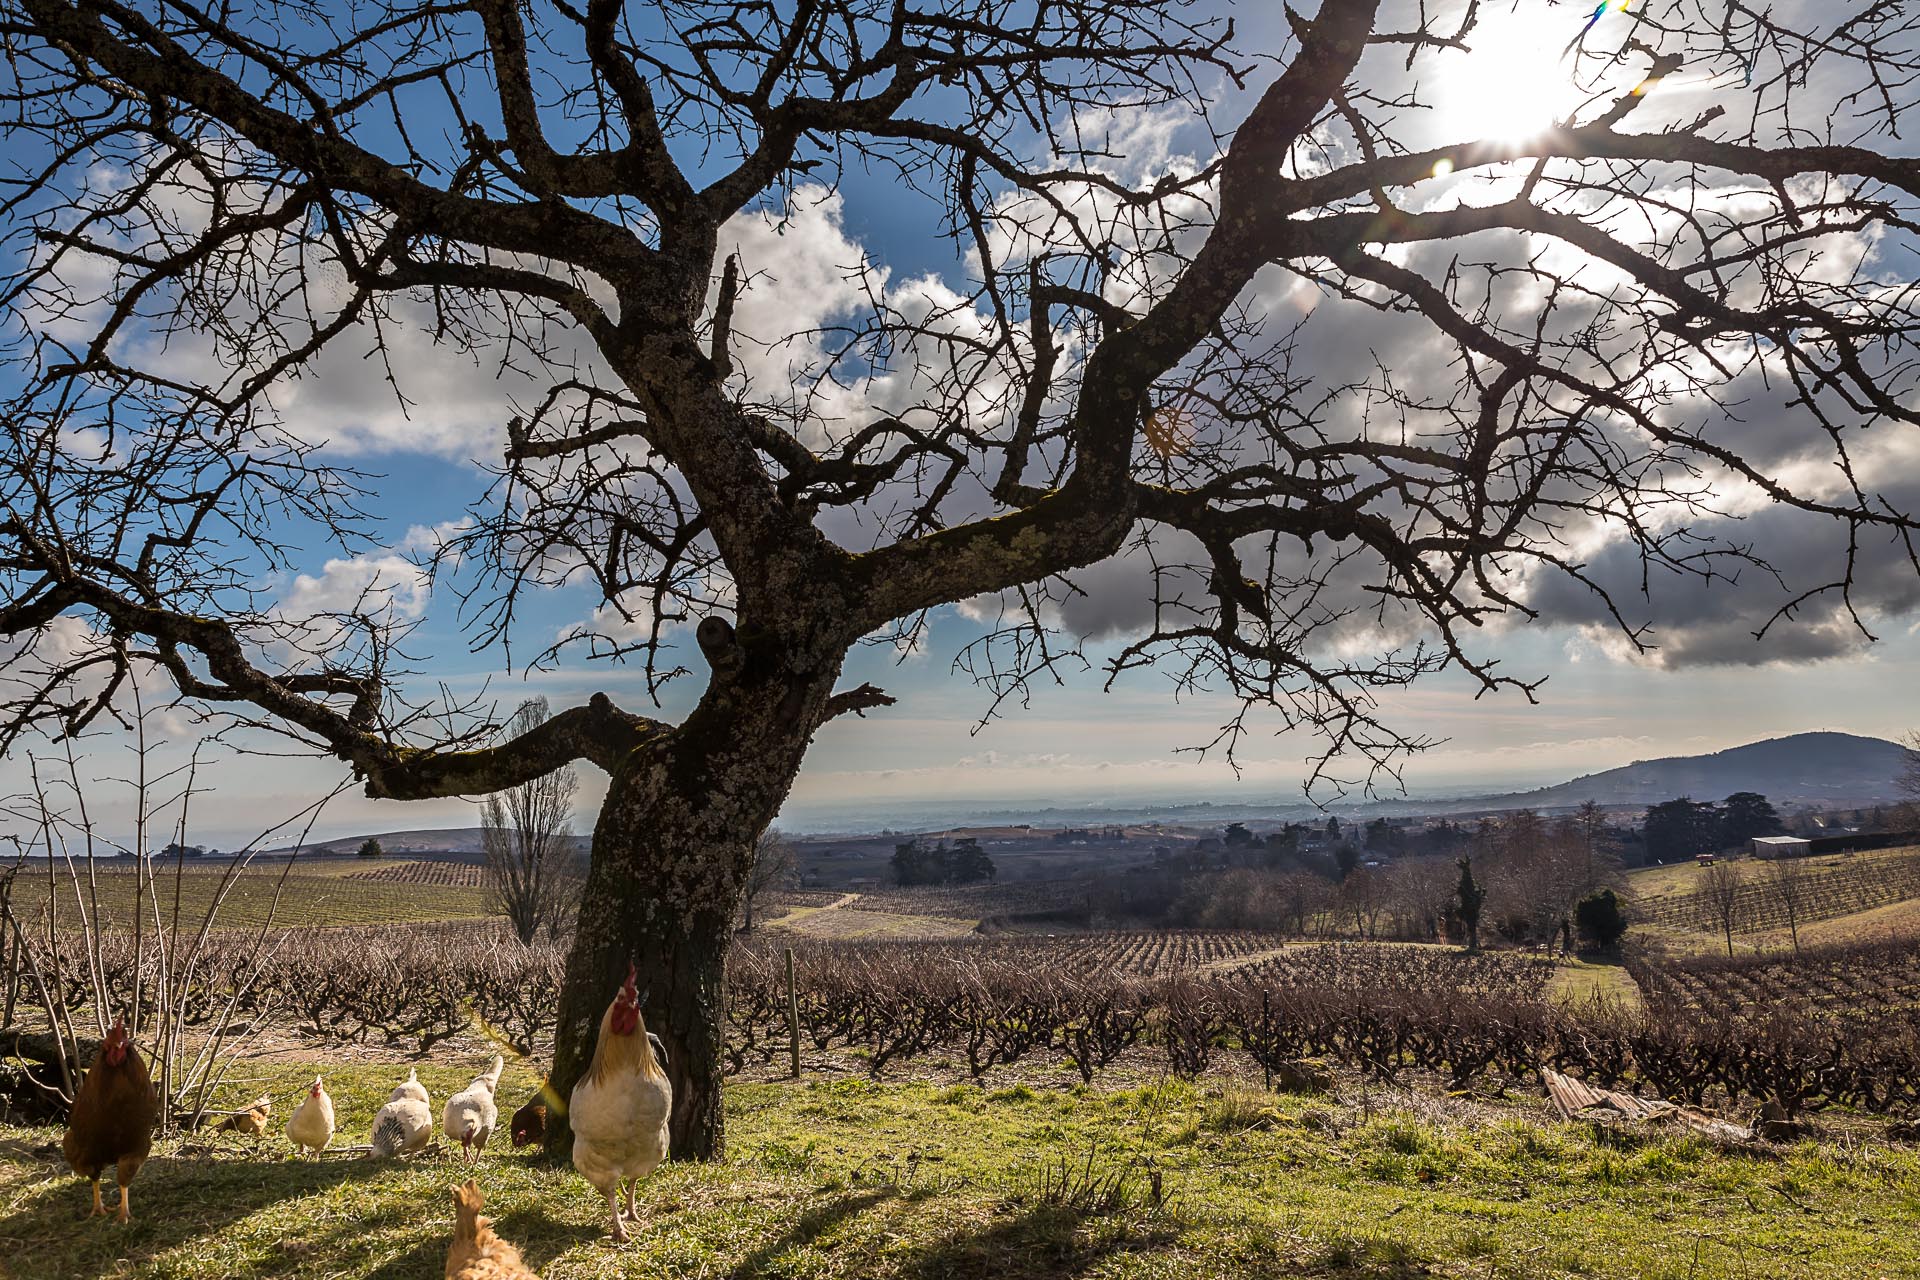 The Beaujolais vineyard: committed to environmental initiatives